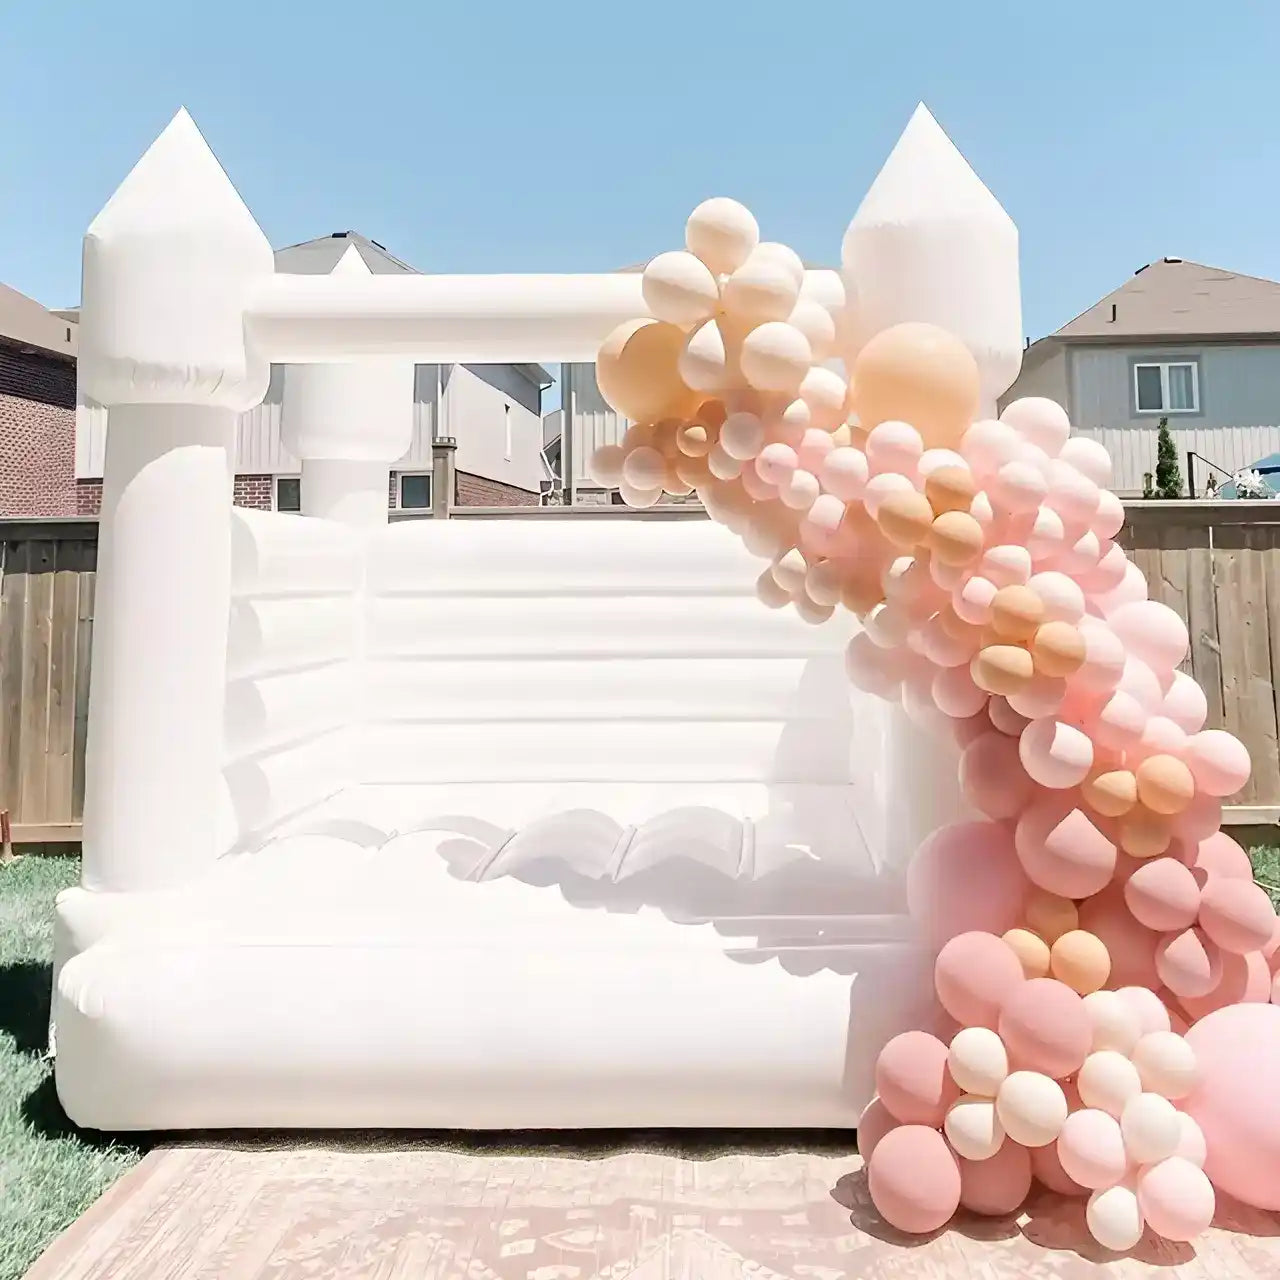 mini white bounce house with balloons